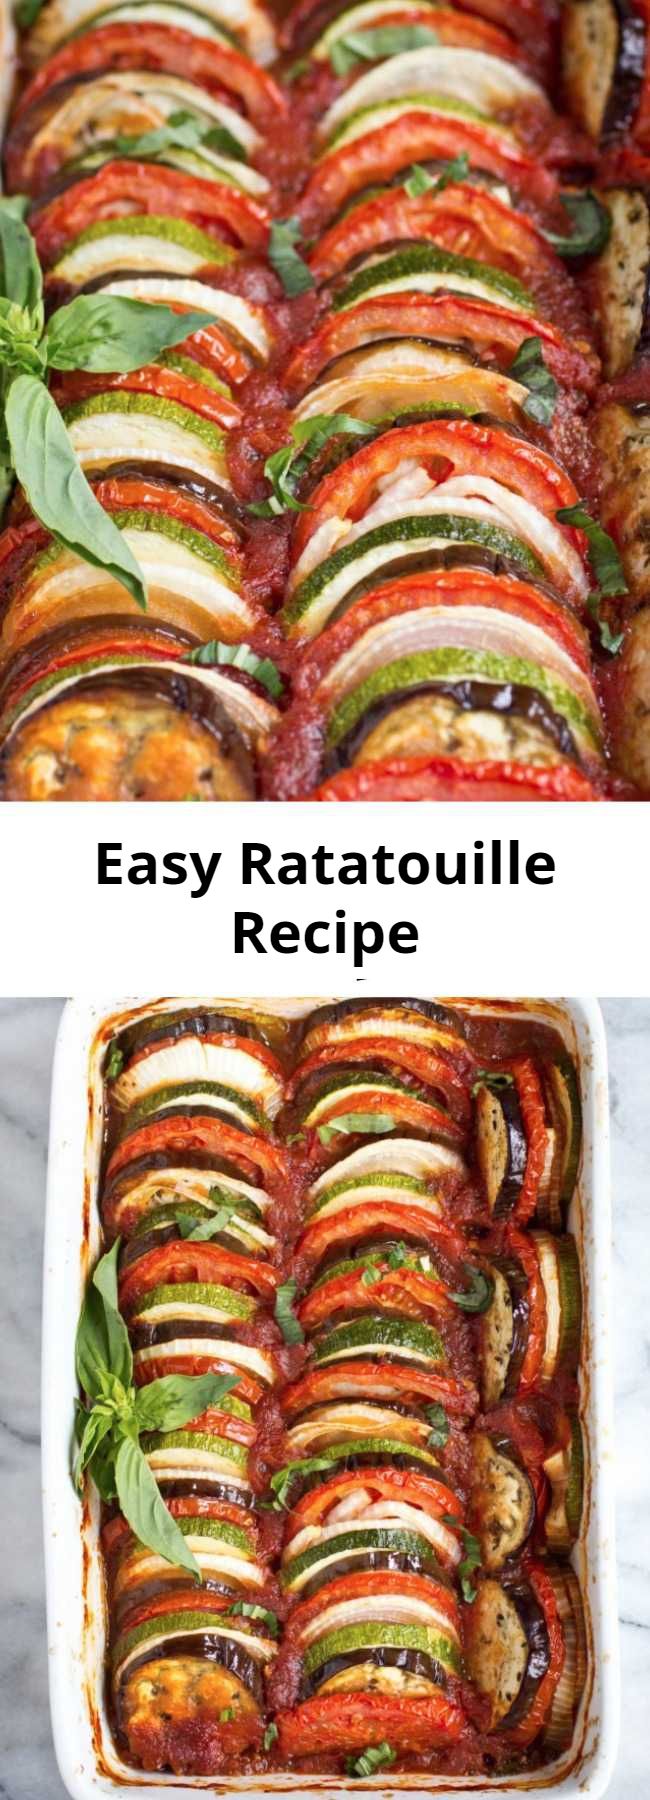 Easy Ratatouille Recipe - This Ratatouille recipe comes together quickly for a fresh weeknight dinner. Plus, it's suitable for gluten free, paleo and vegan diets! It’s a light & fresh dish. Plus, it freezes well – so go ahead and make a double batch! #ratatouille #glutenfreesavory #paleomeals #whole30dinner #whole30sidedish #ketodinnerrecipe #vegetarianeasyrecipes